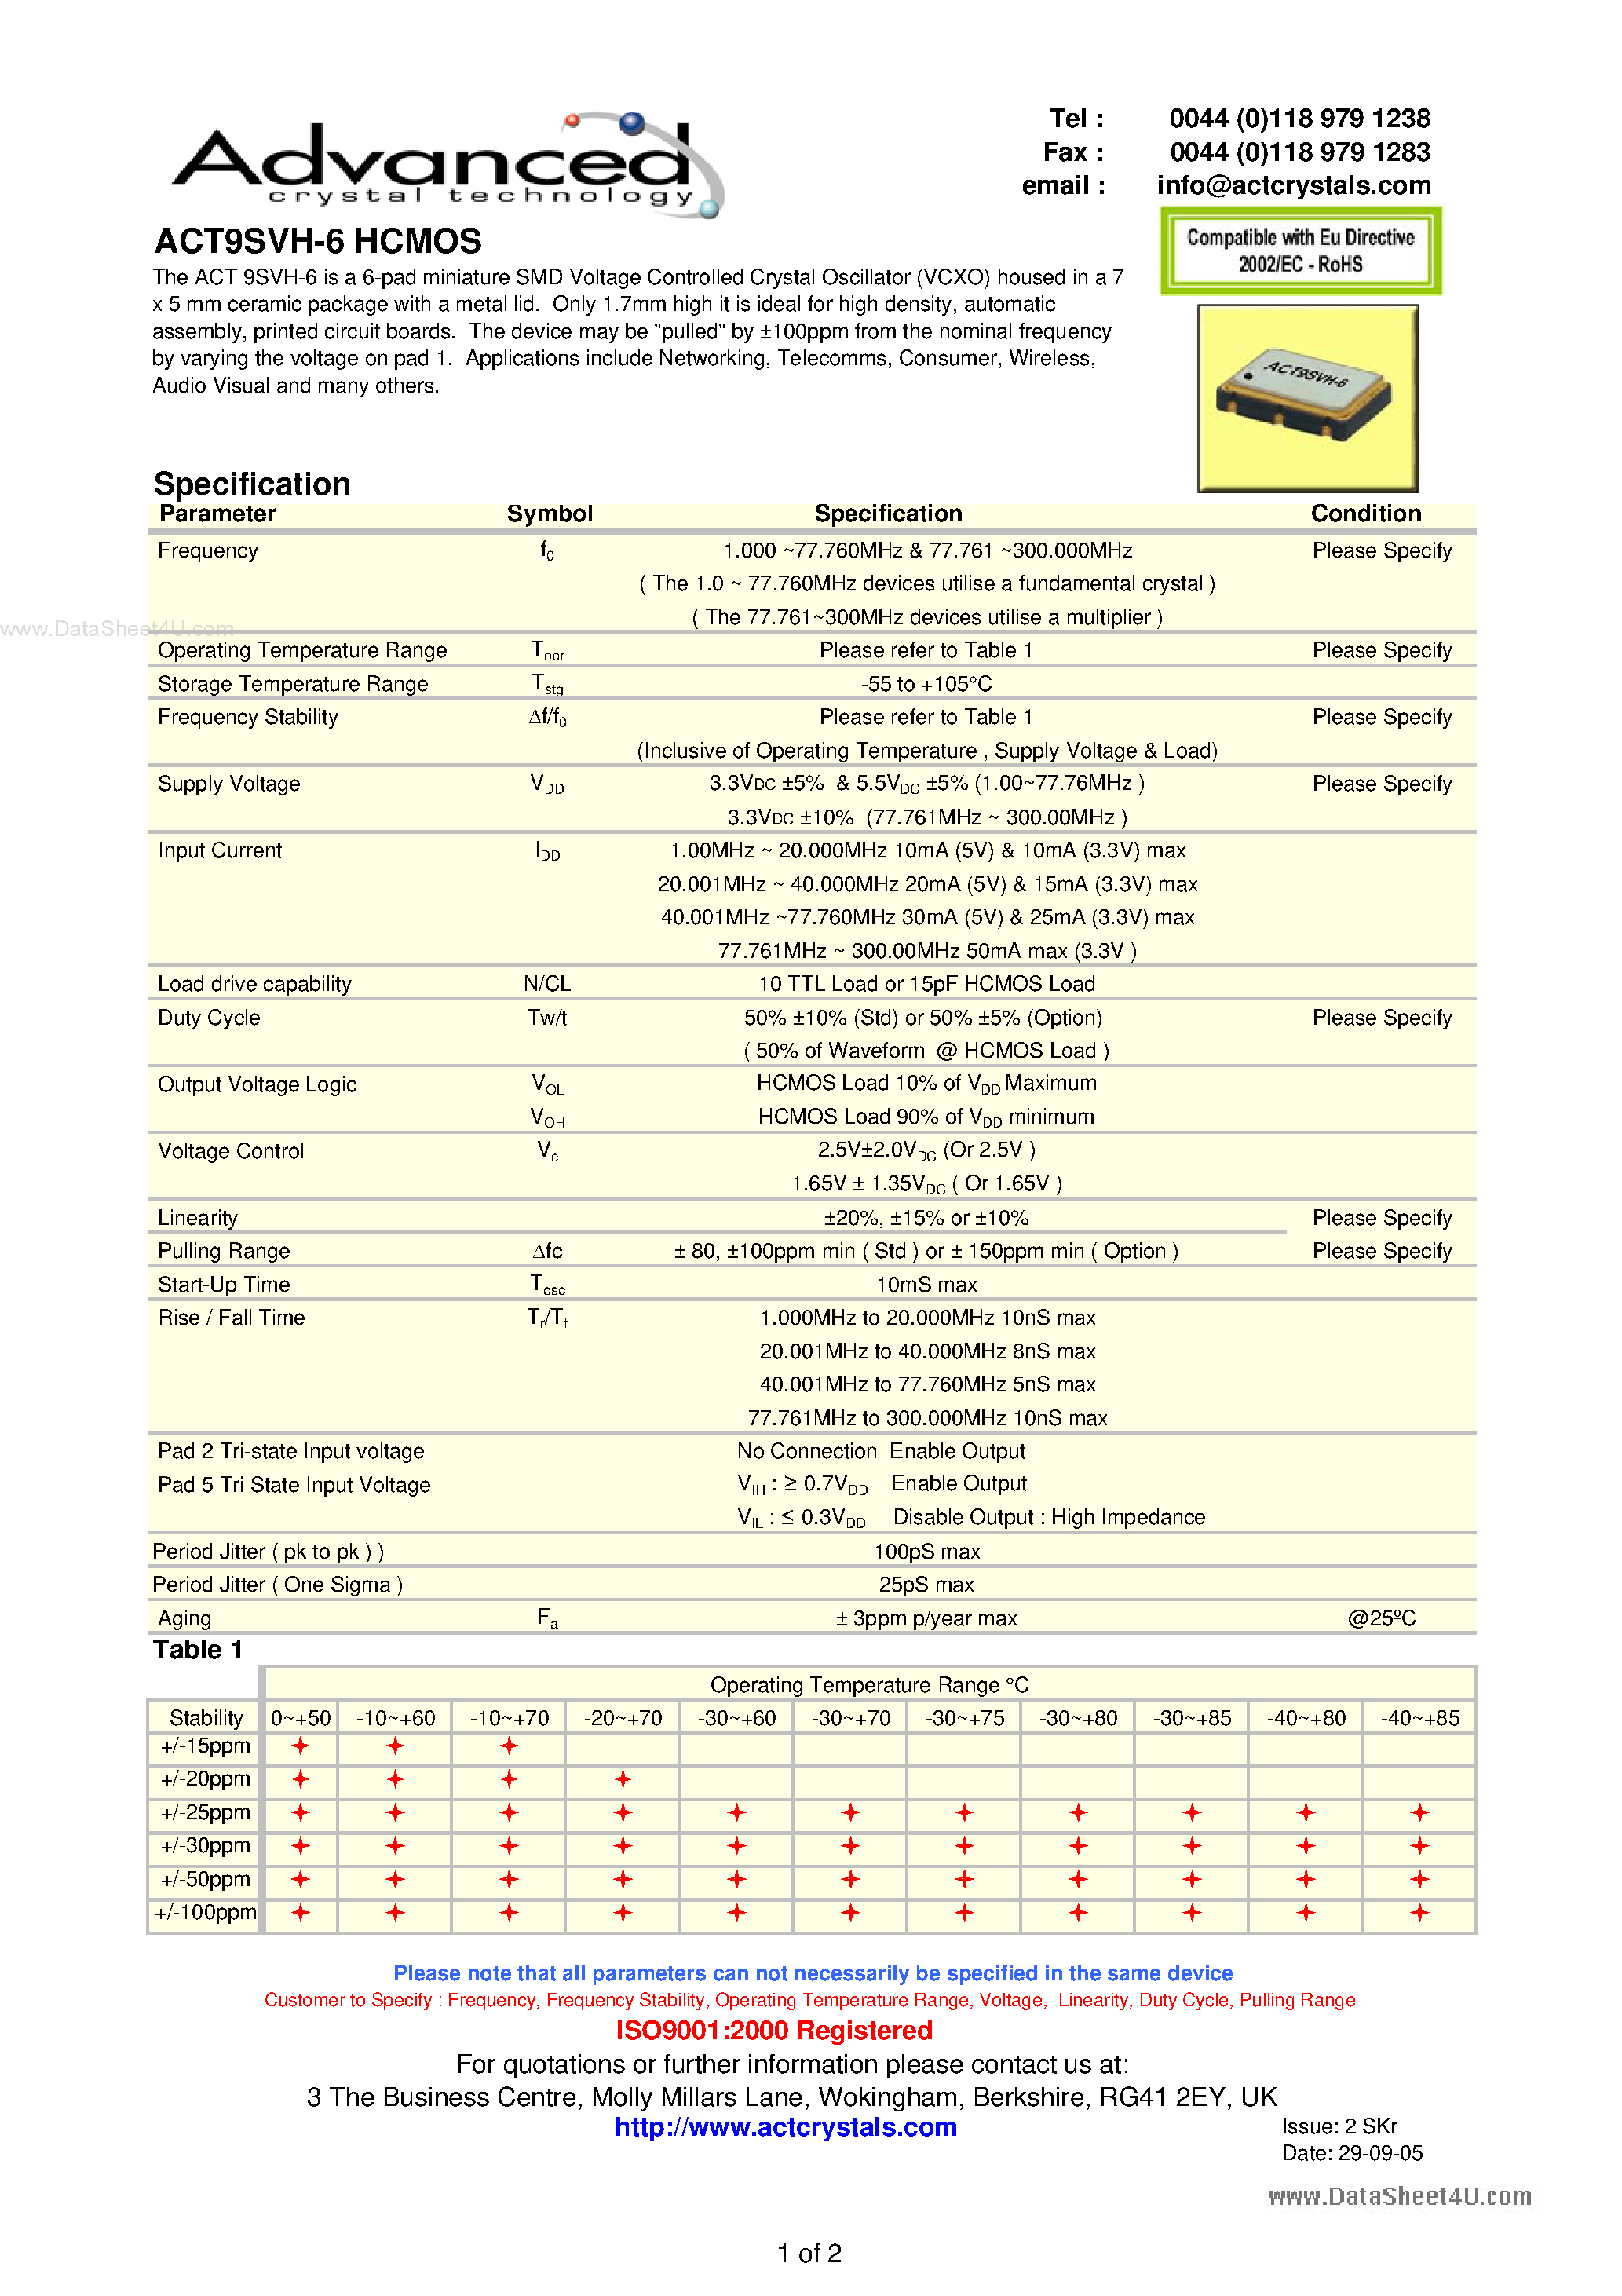 Datasheet ACT9SVH-6 - 6-pad miniature SMD Voltage Controlled Crystal Oscillator page 1